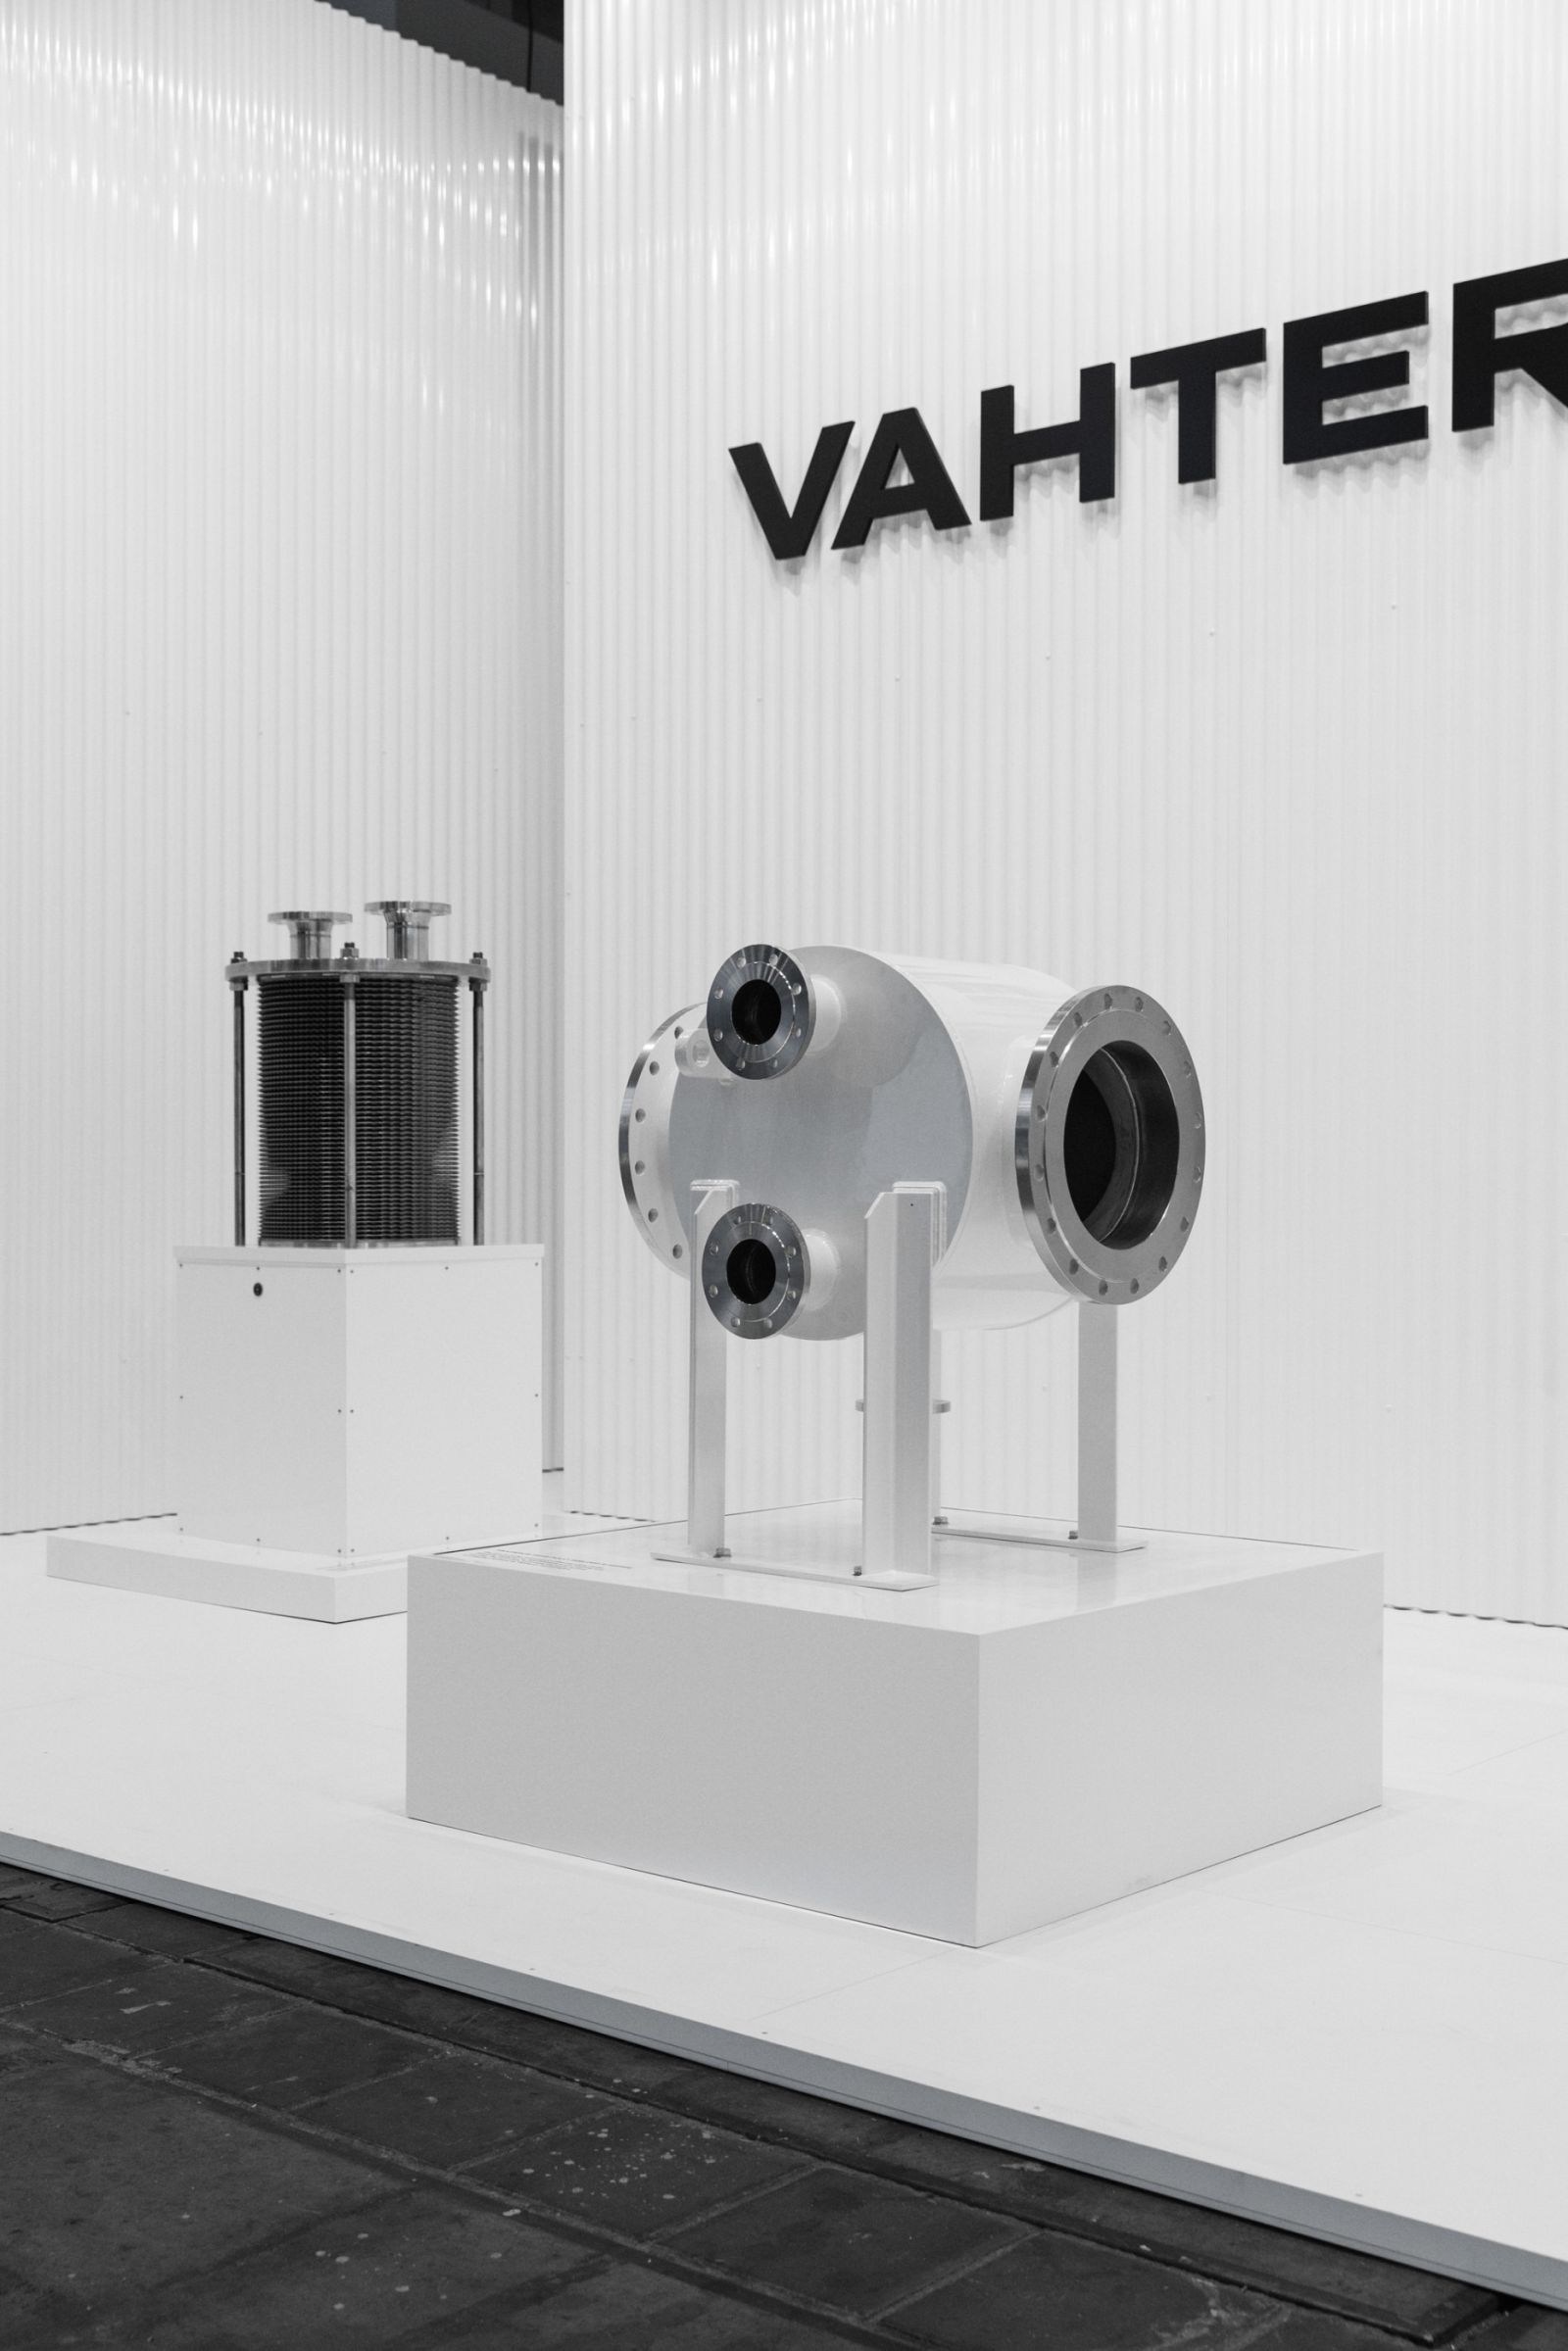 Vahterus PSHE 5SH is developed for gas applications